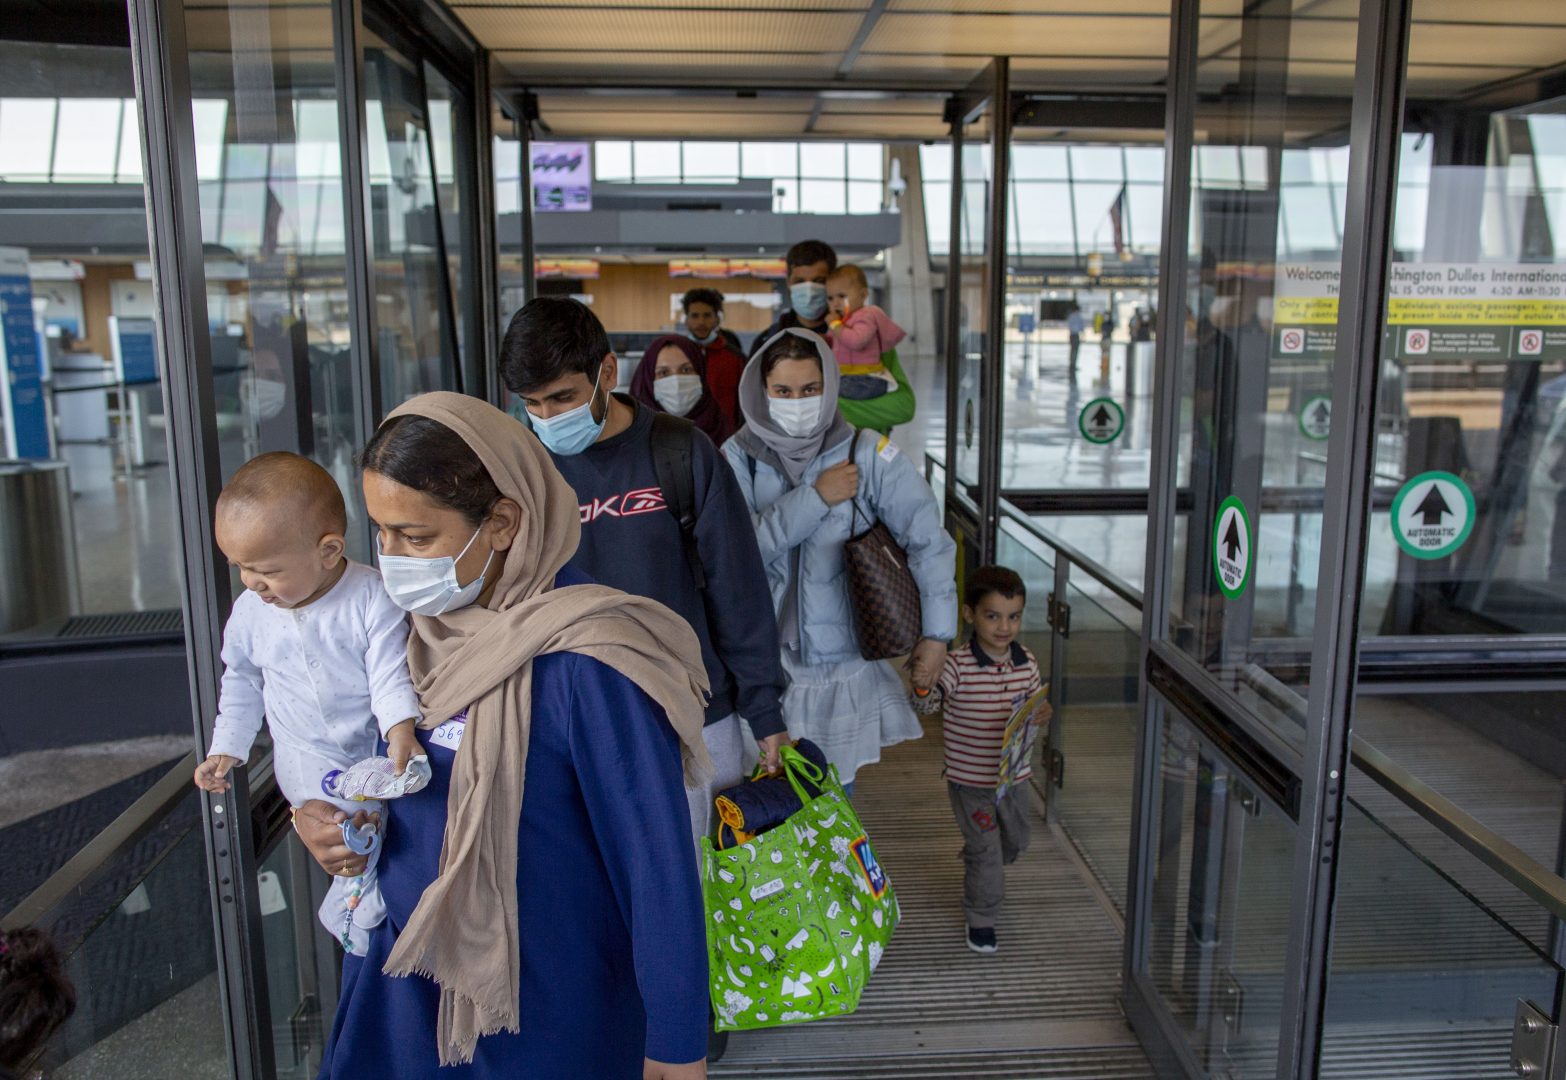 Families evacuated from Kabul, Afghanistan, walk through the terminal to board a bus after they arrived at Washington Dulles International Airport, in Chantilly, Va., on Saturday, Aug. 28, 2021.